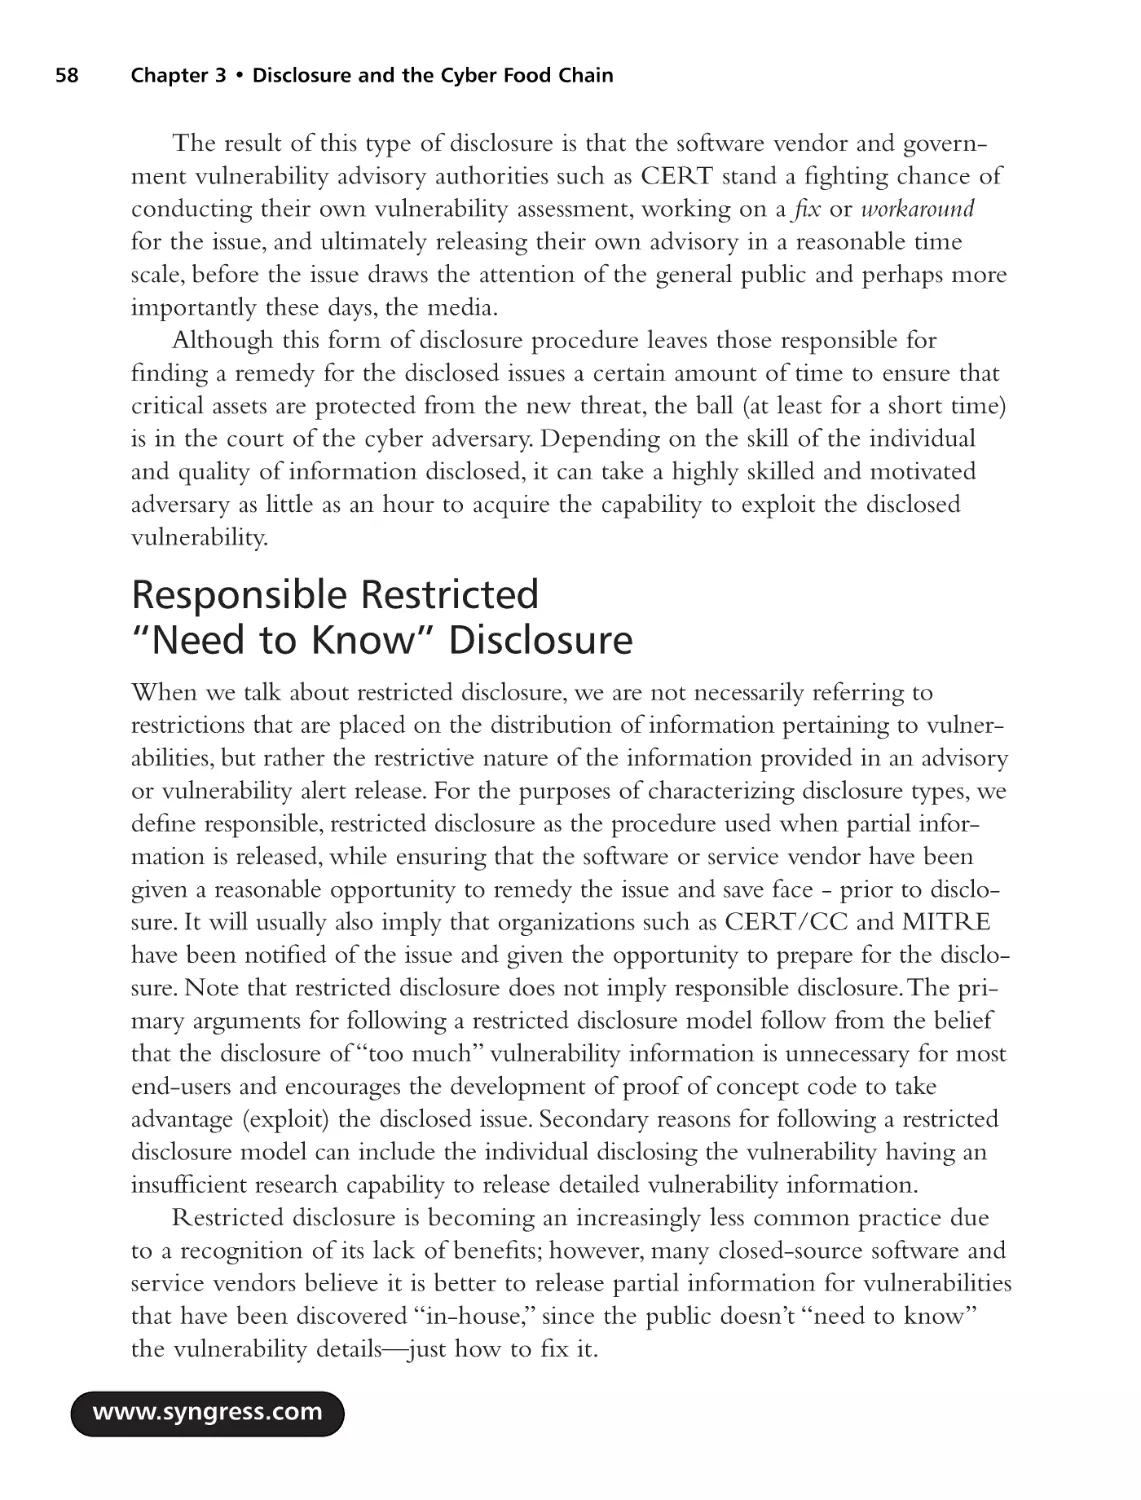 Responsible Restricted "Need to Know" Disclosure